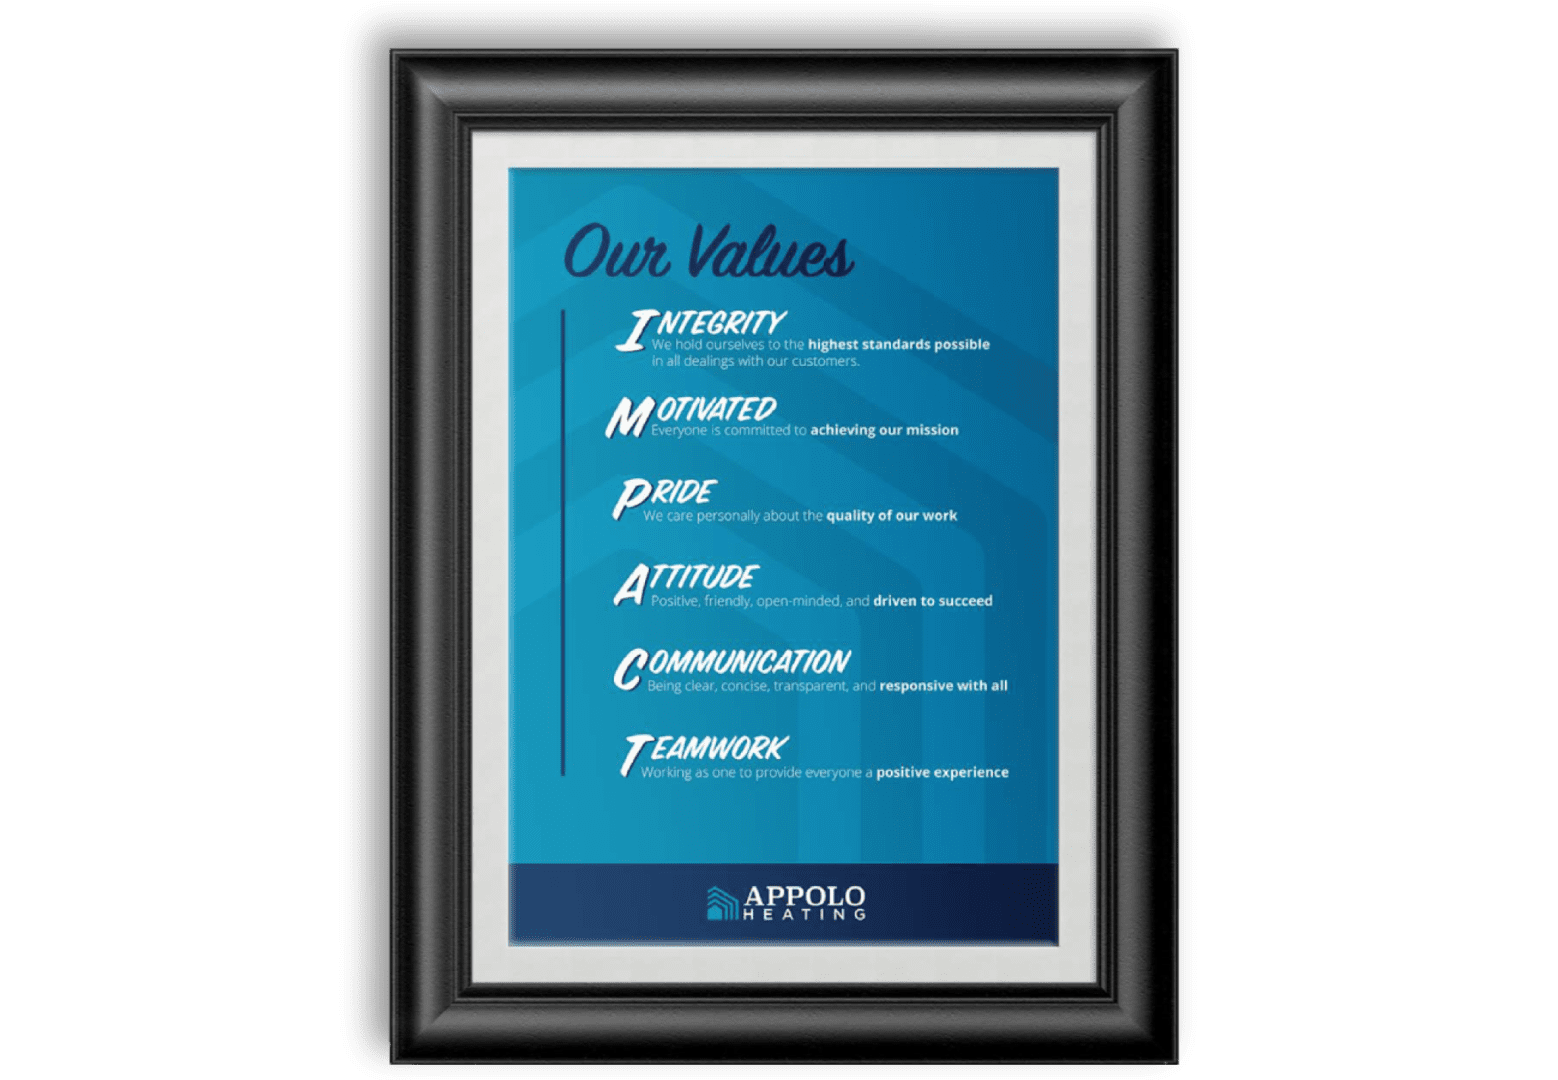 A framed poster of the values of ansma